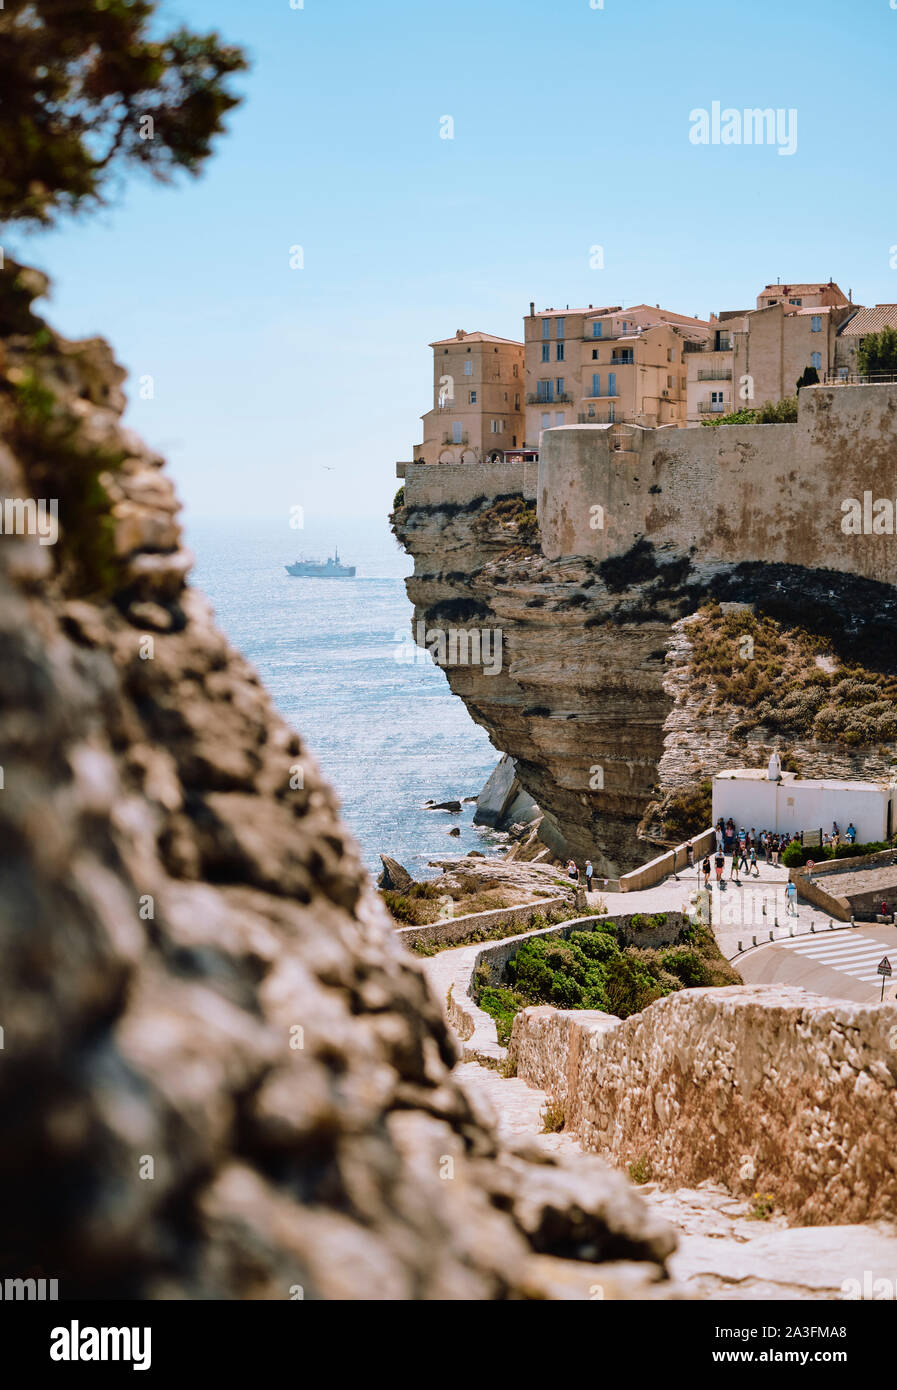 The limestone clifftop citadel town and ferry of Bonifacio on the southern tip of the French island of Corsica - Corse du Sud France. Stock Photo